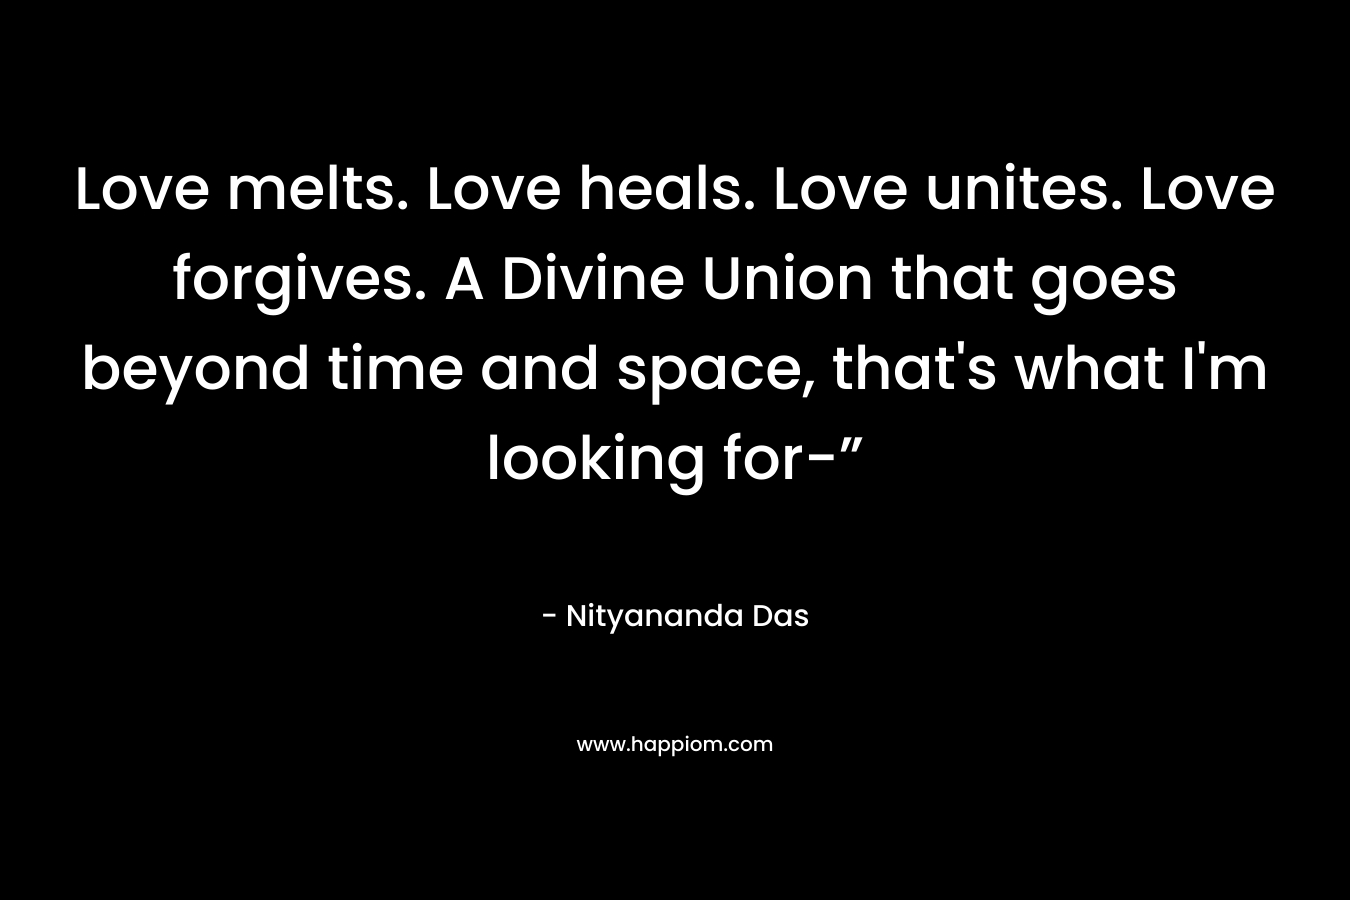 Love melts. Love heals. Love unites. Love forgives. A Divine Union that goes beyond time and space, that’s what I’m looking for-” – Nityananda Das